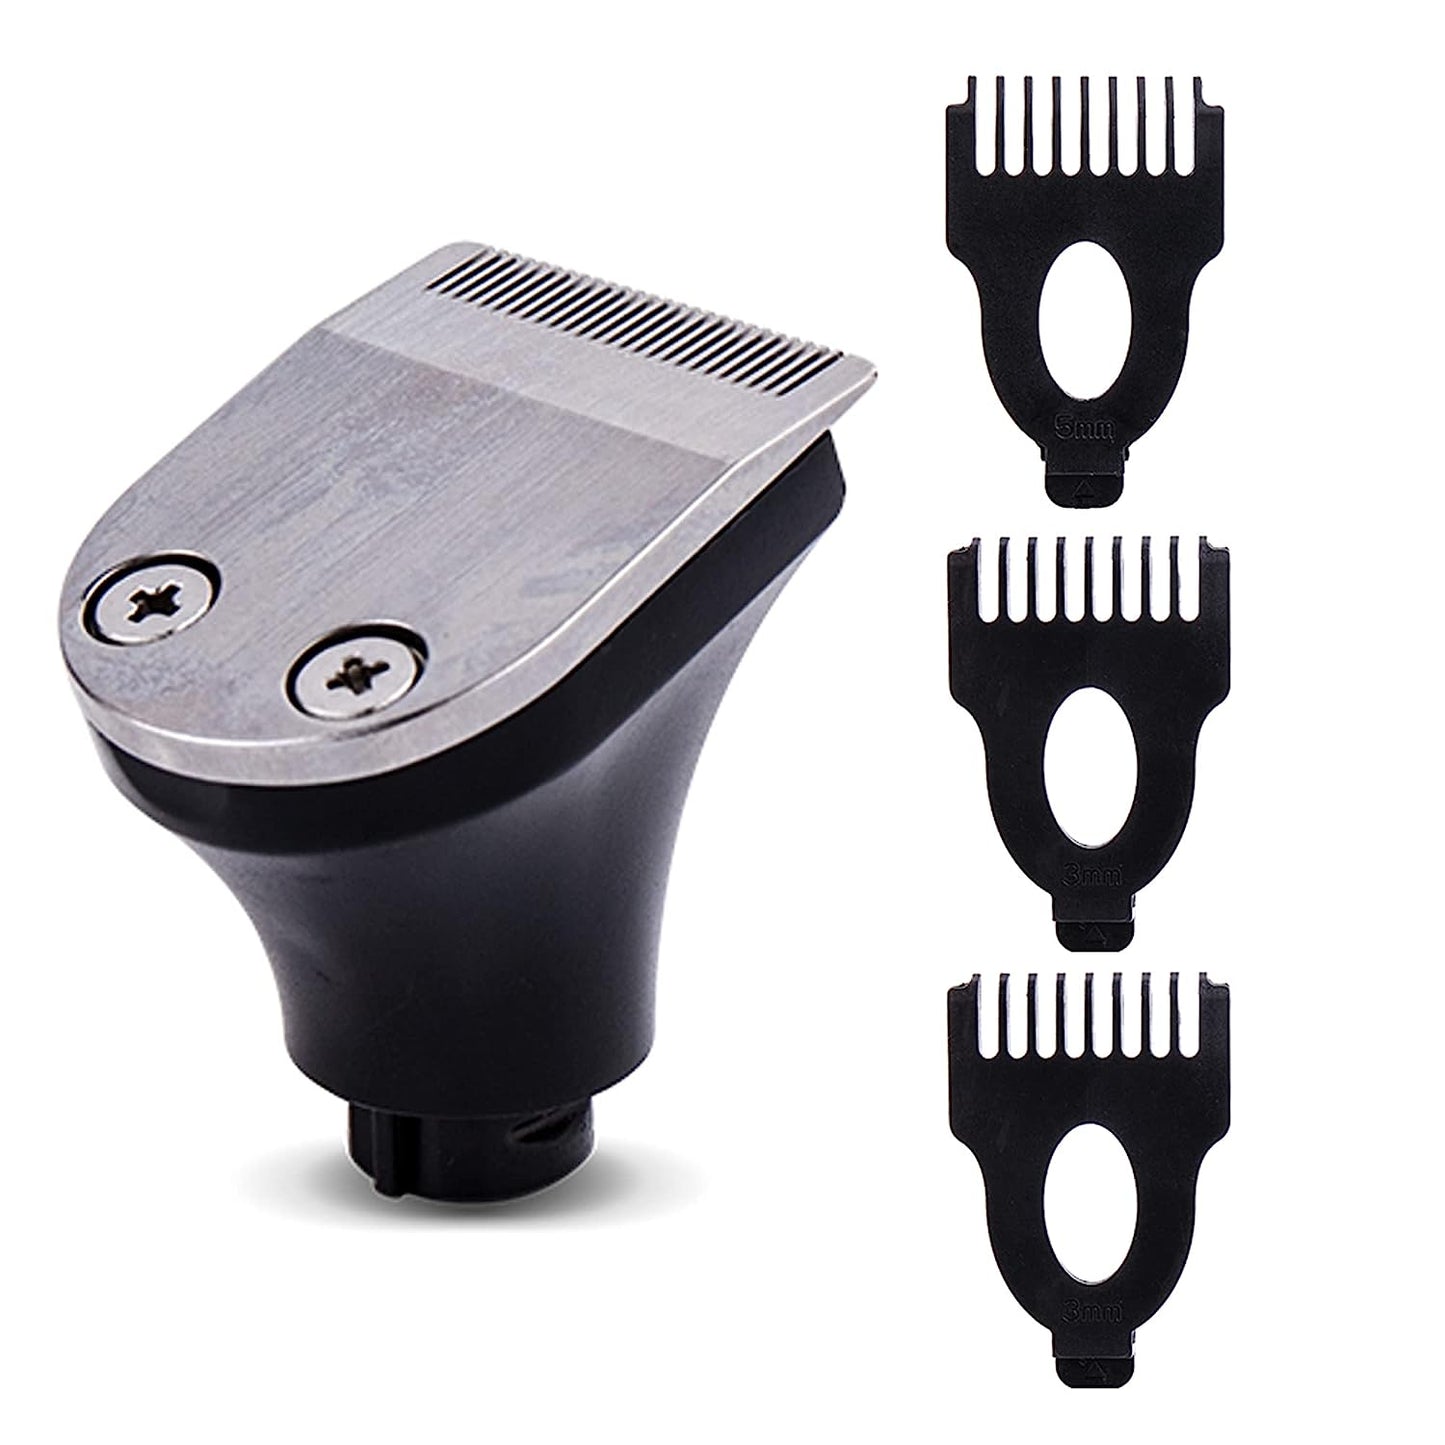 AidallsWellup Precision Trimmer Head, Clipper Head With 3 Limit Combs (3 mm, 5 mm, 7 mm).